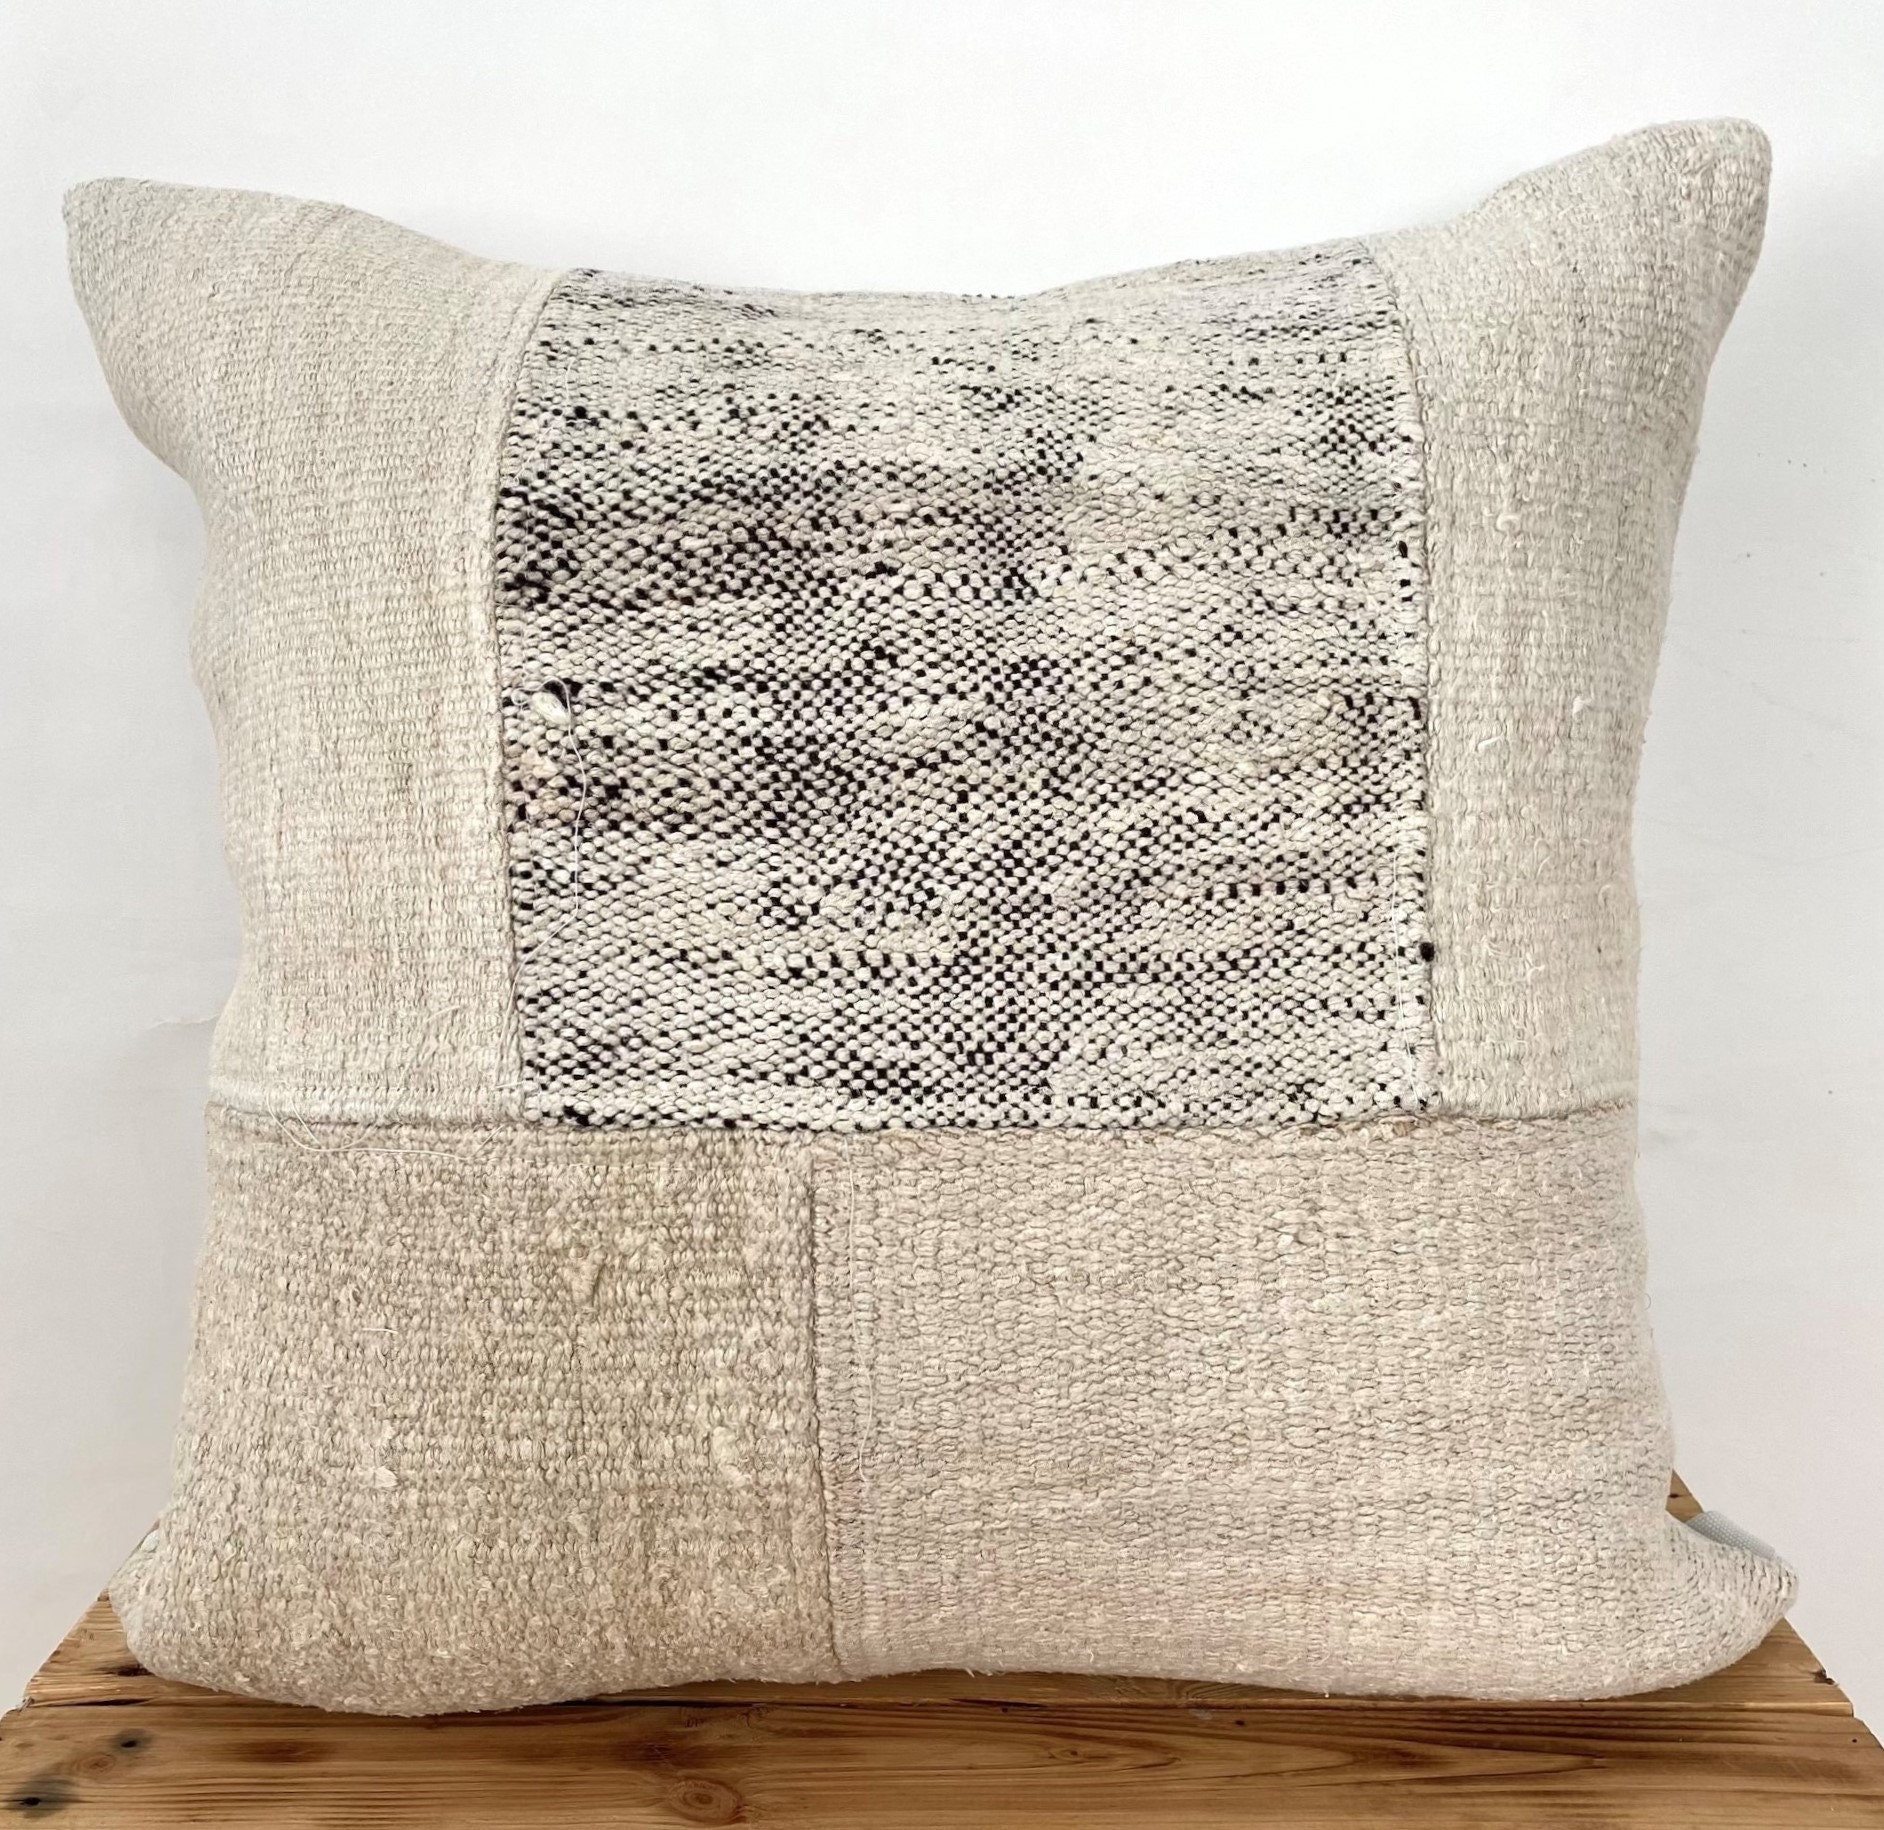 Sofa Cover Decorative Pillow Handmade Cover PE-1262 White Hemp Pillow Cover Couch Pillow 24 x 24 Turkish Pillow Cover Corner Pillow